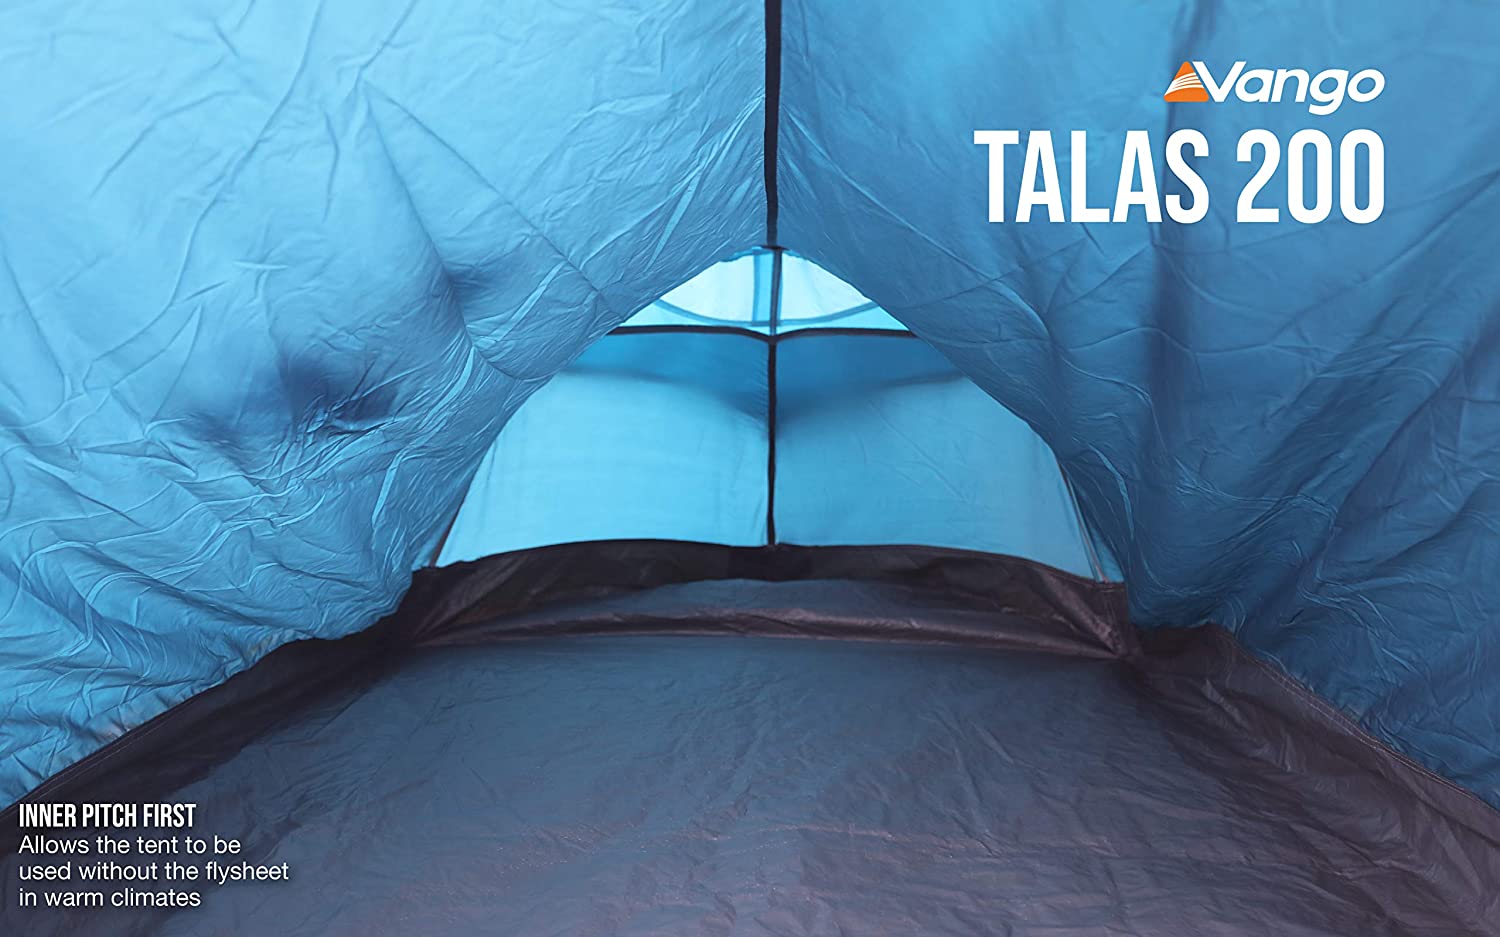 Vango Talas Tunnel Tent - Inner Pitch First